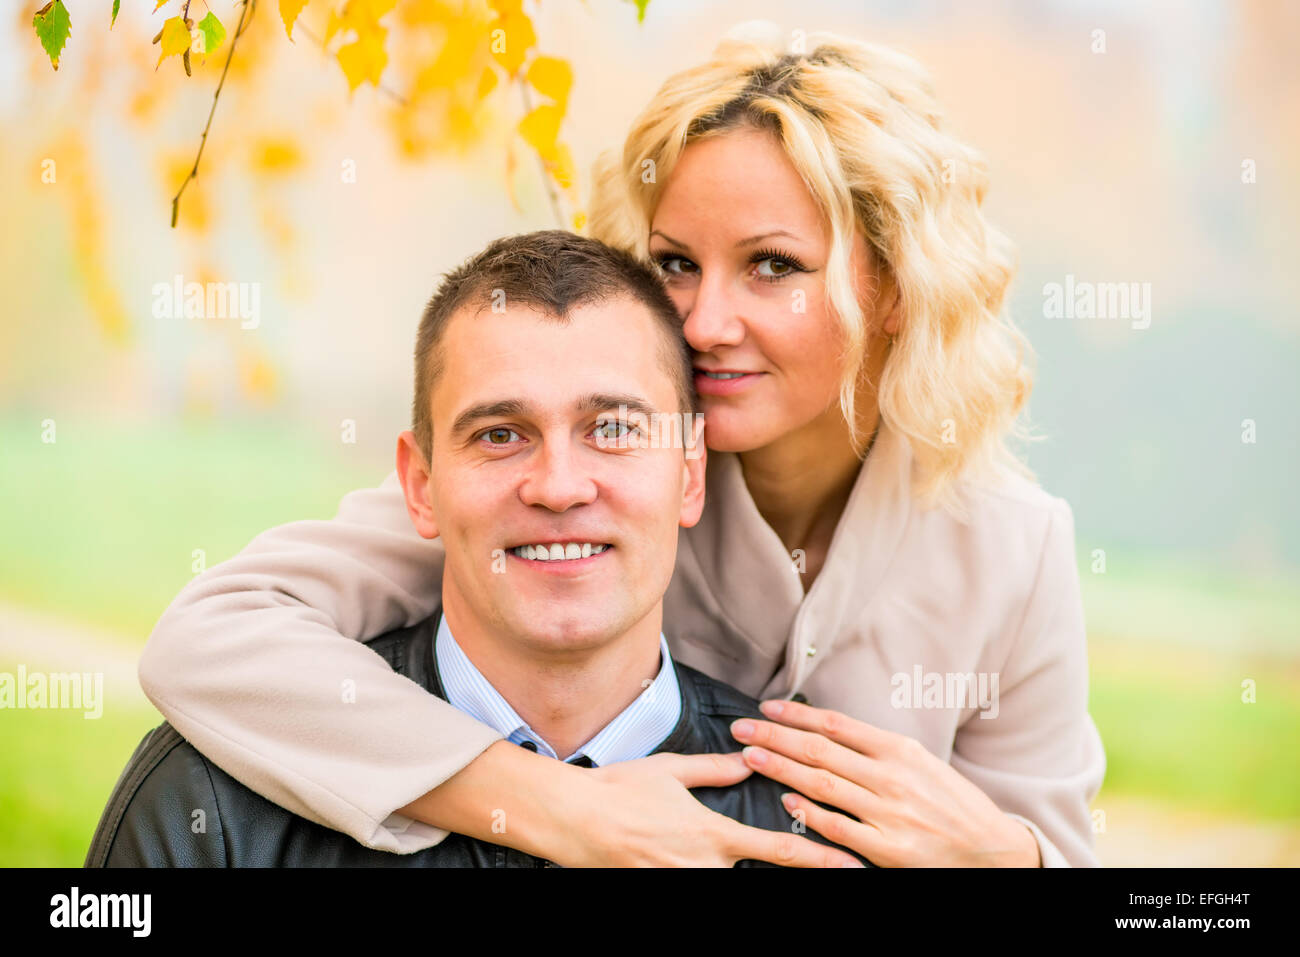 portrait of happy young love couple on nature Stock Photo